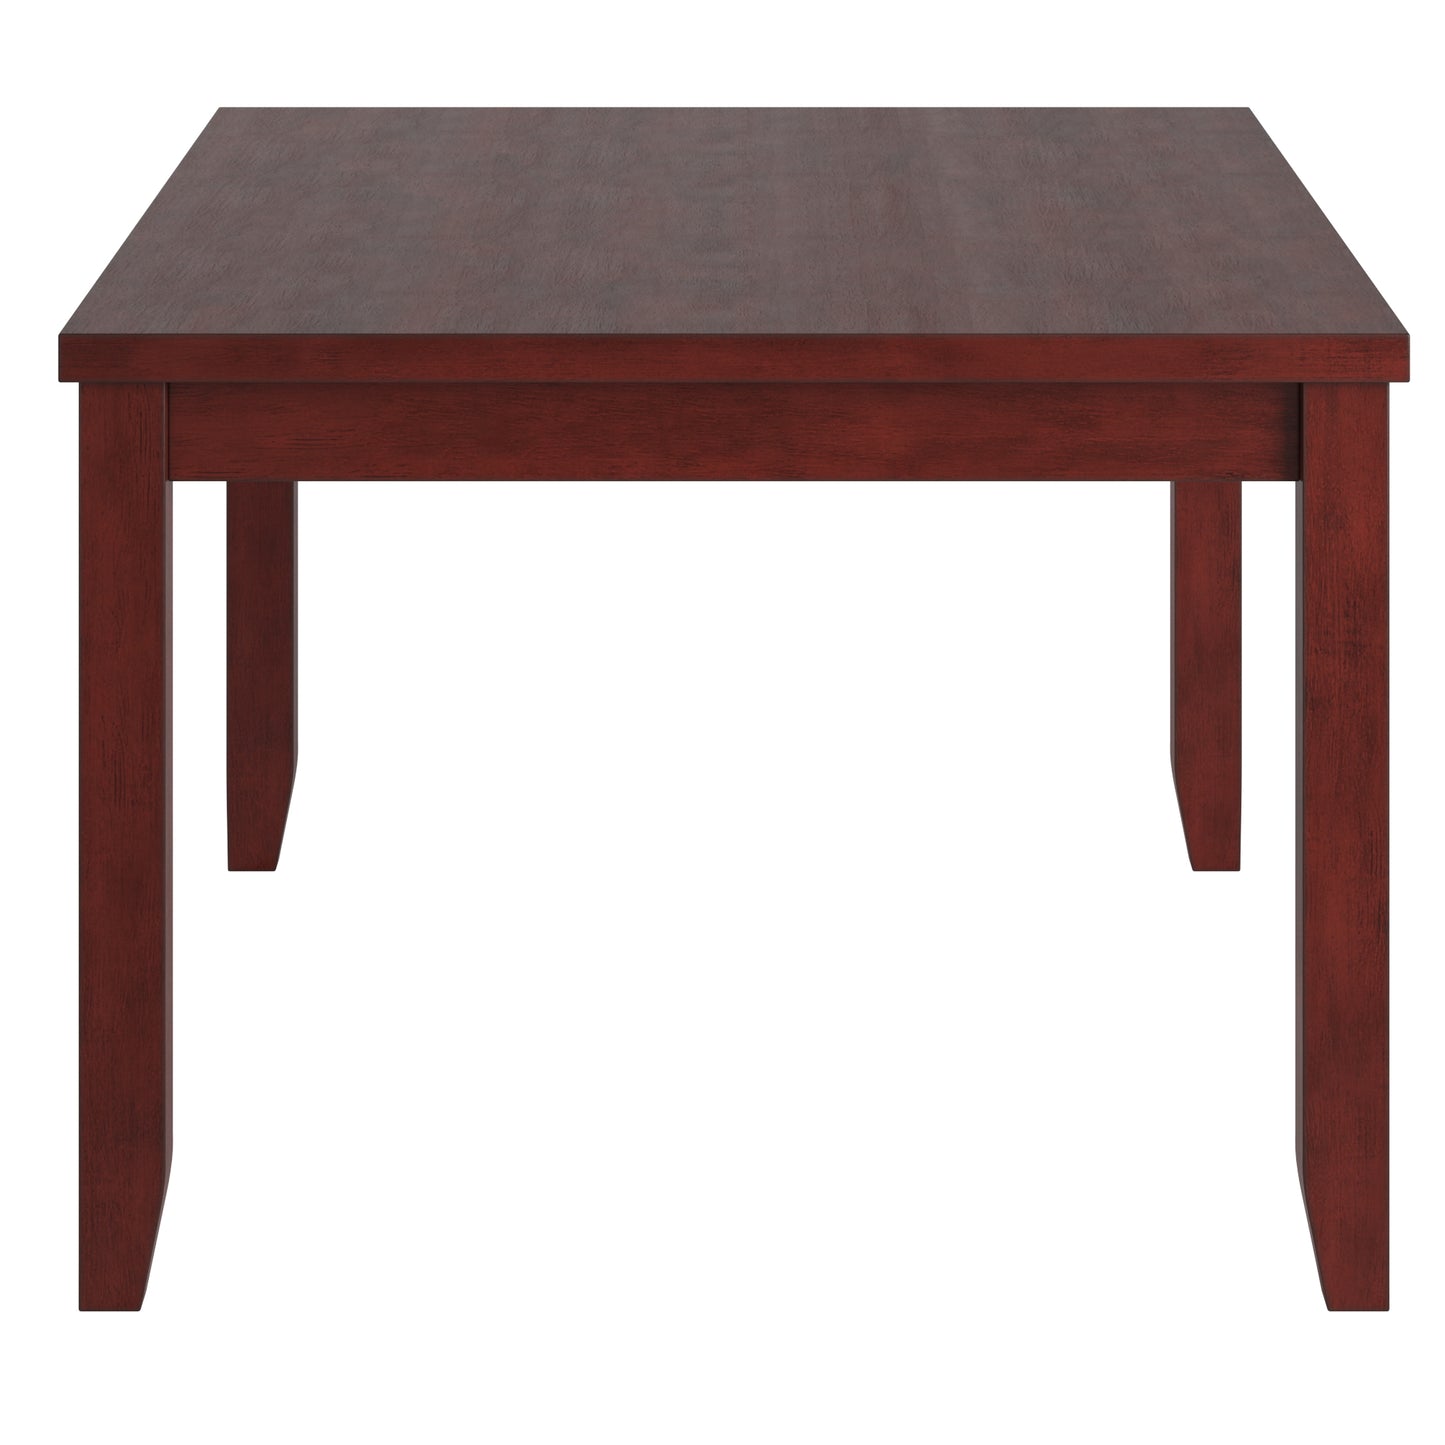 Solid Wood Rectangular Dining Table with Two Drawers - Antique Berry